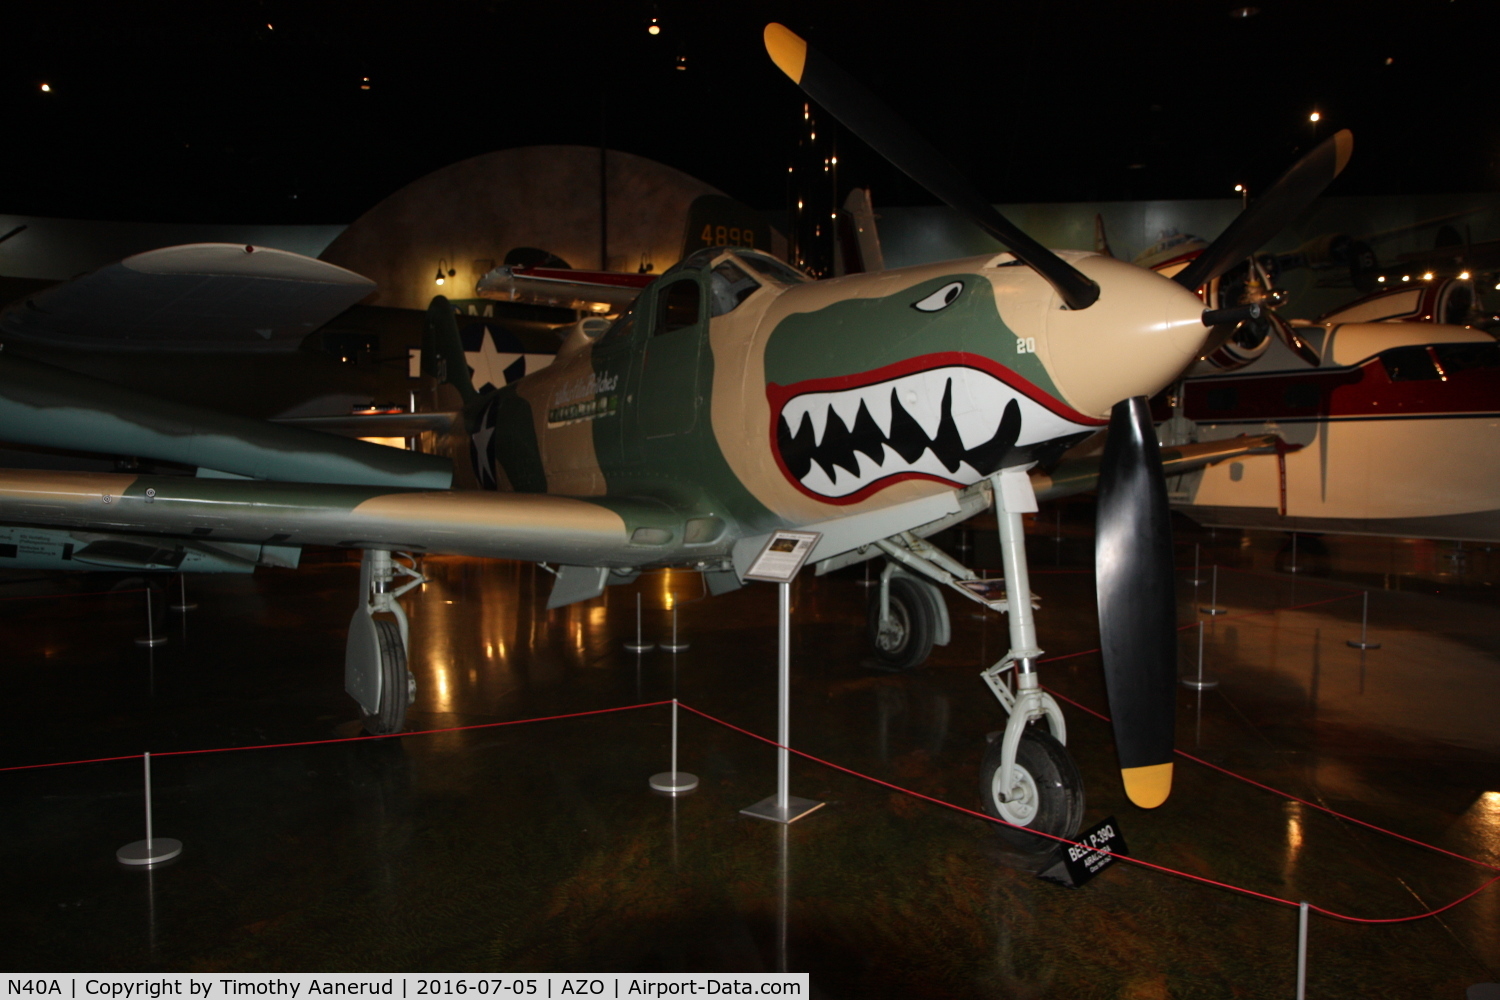 N40A, 1944 Bell P-39Q Airacobra C/N Not found 44-3908, 1944 Bell P-39Q Airacobra, United States Army Air Force serial: 44-3908